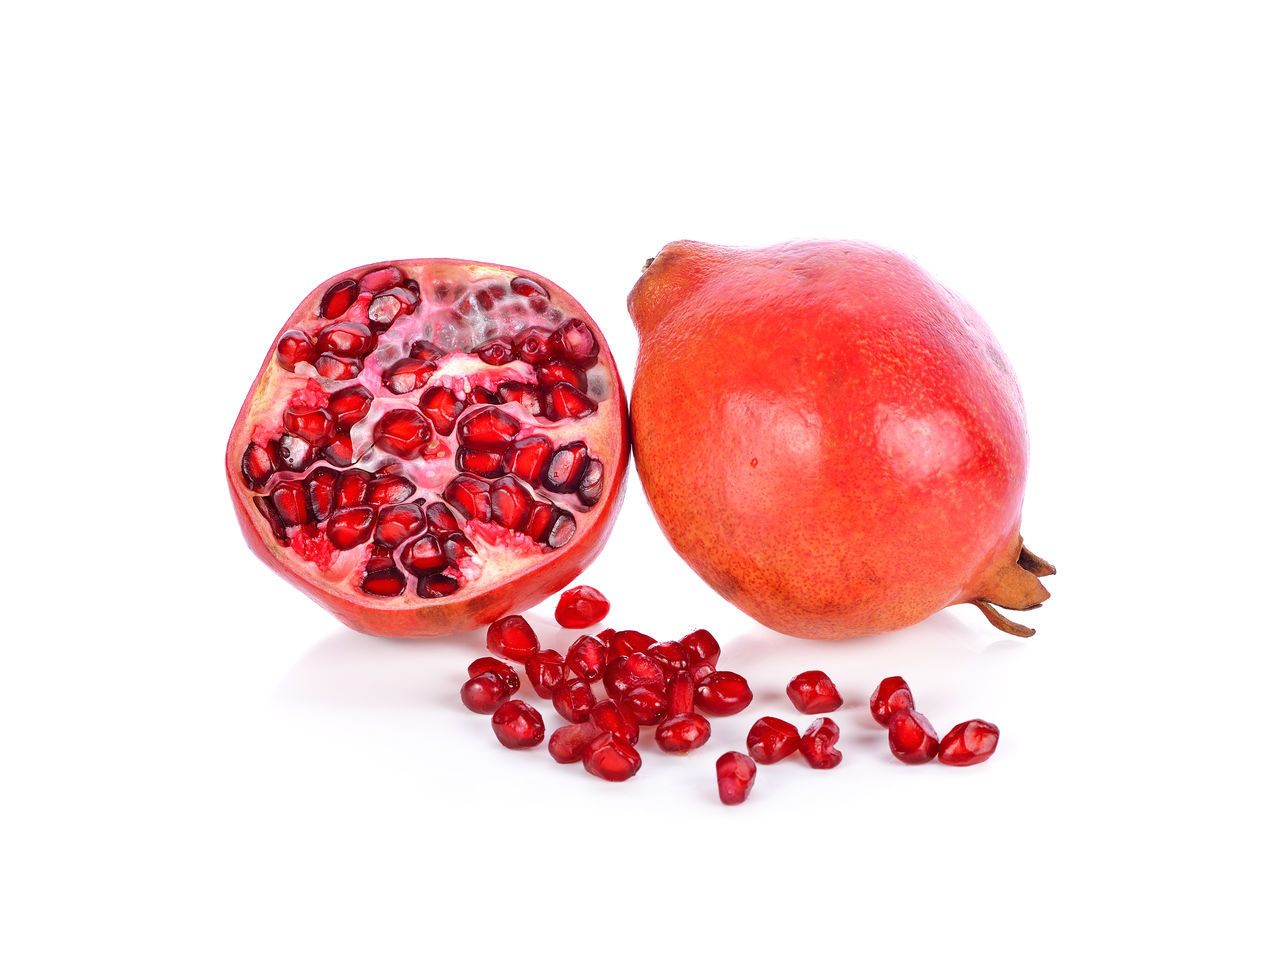 HIGH ANGLE VIEW OF RED FRUITS AGAINST WHITE BACKGROUND